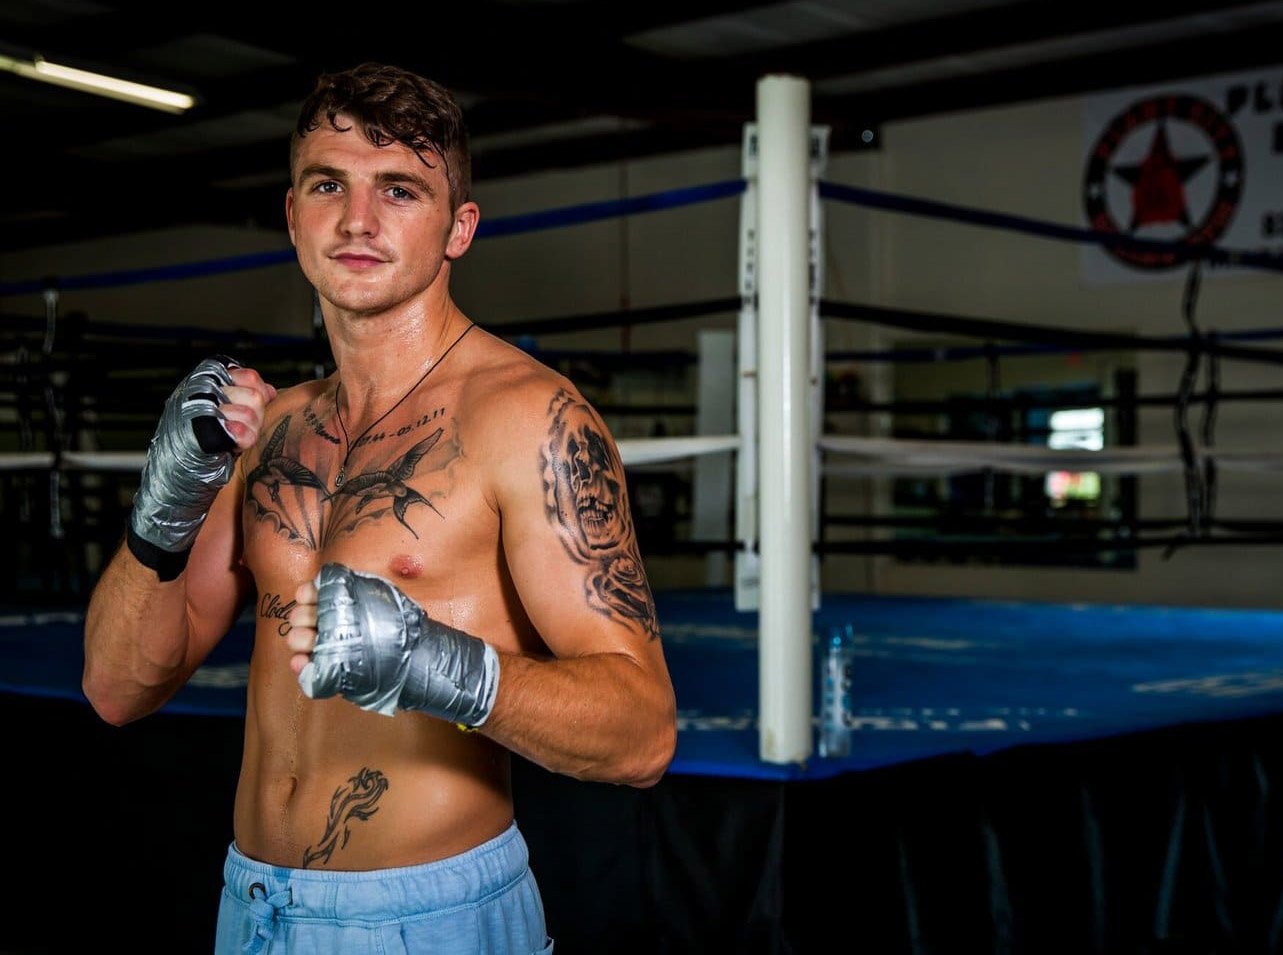 Middleweight Connor Coyle on road to title shot: “I feel I’m one of the best”